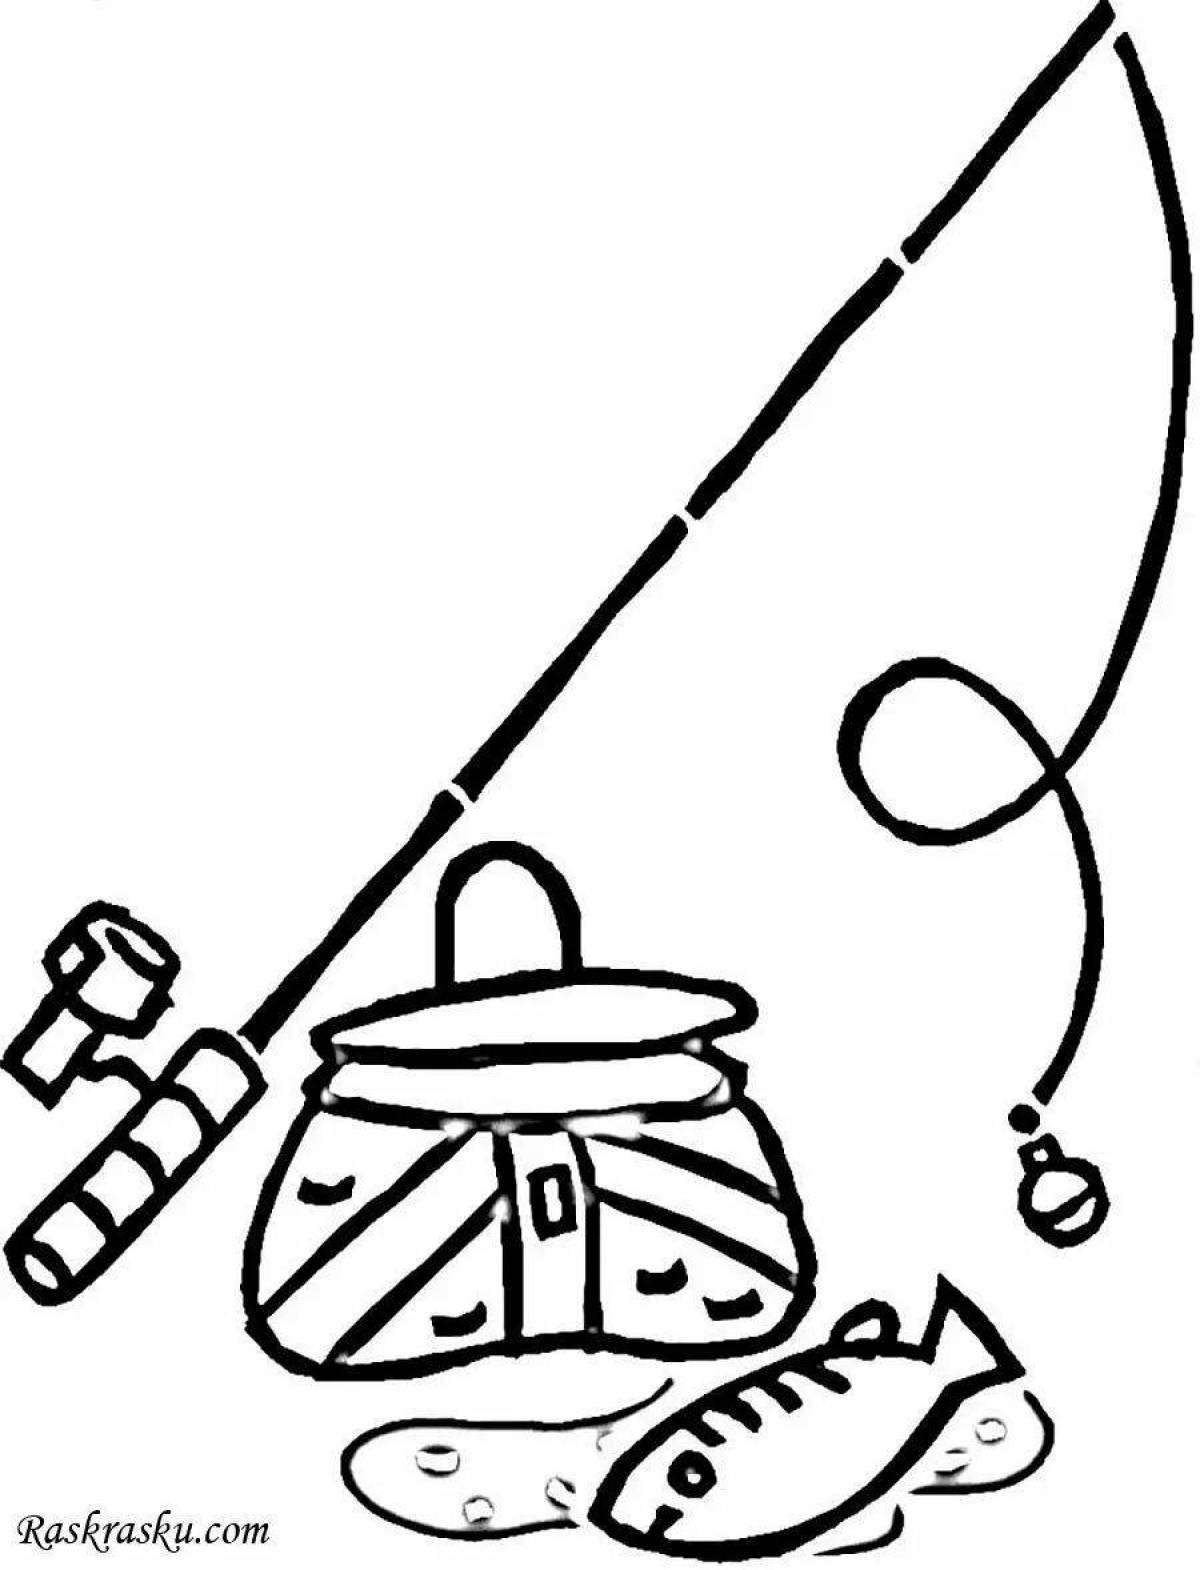 Adorable fishing rod coloring page for kids